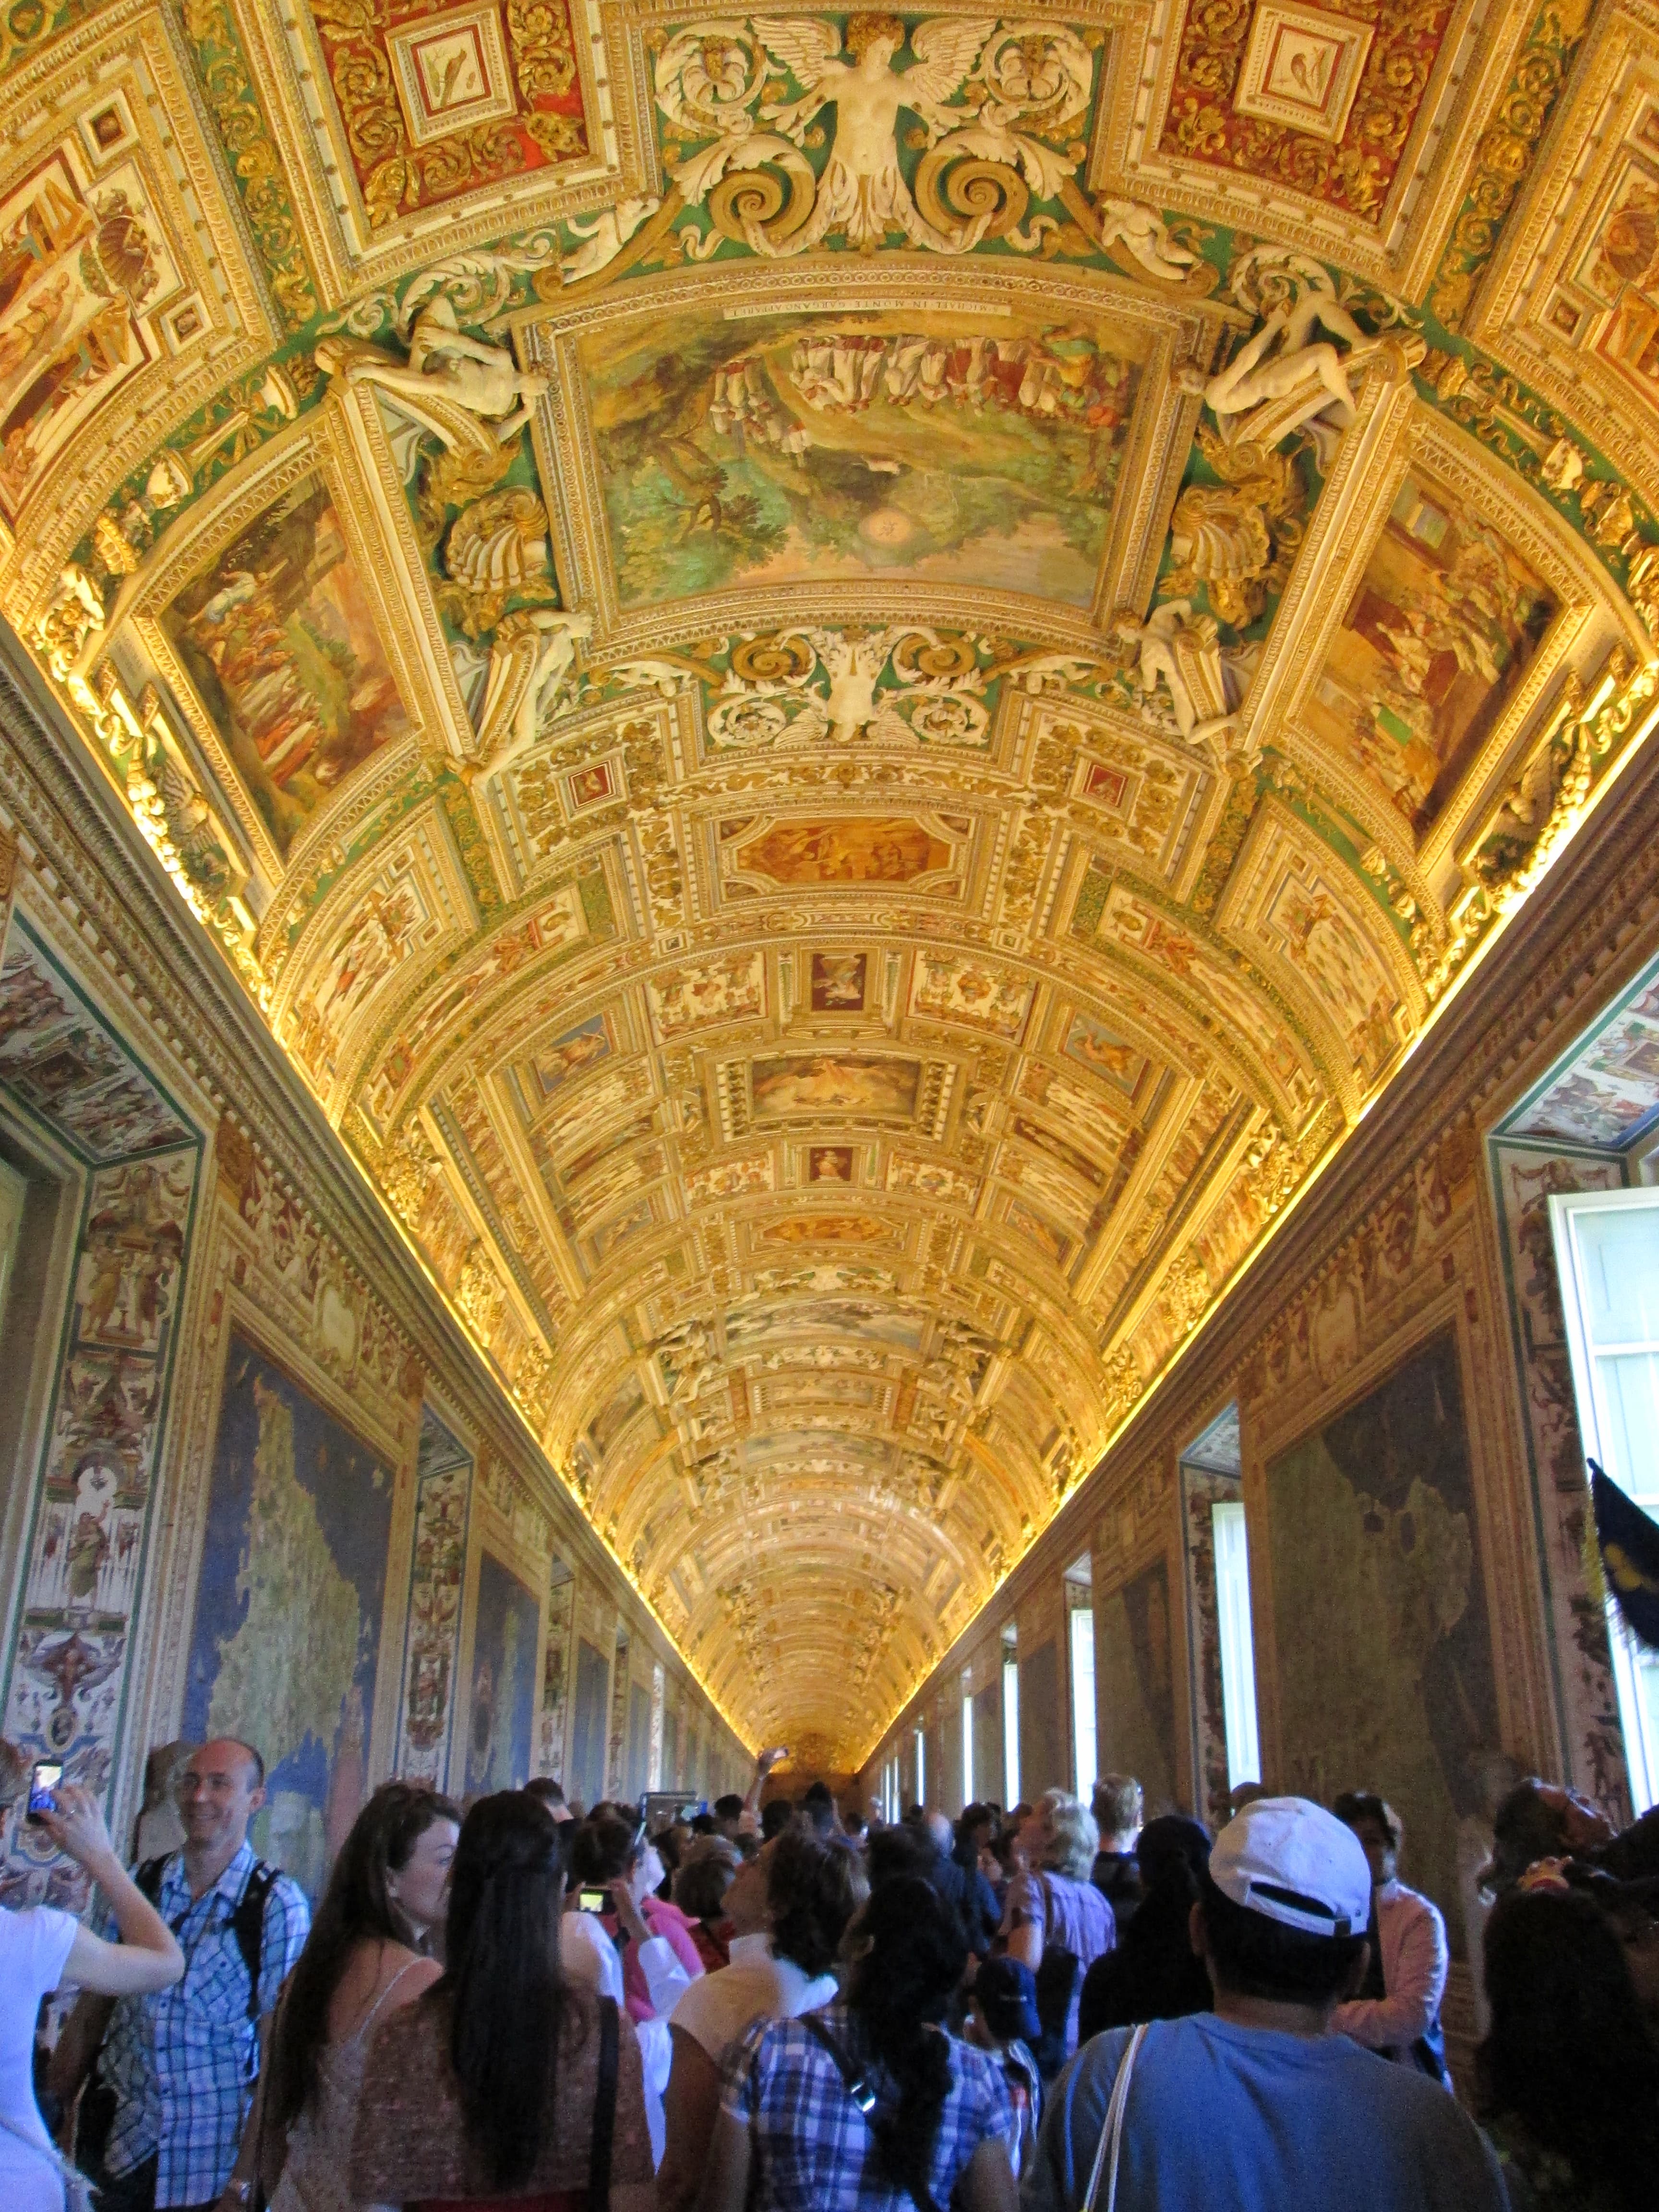 The Ceiling of the Sistine Chapel in Rome, Italy